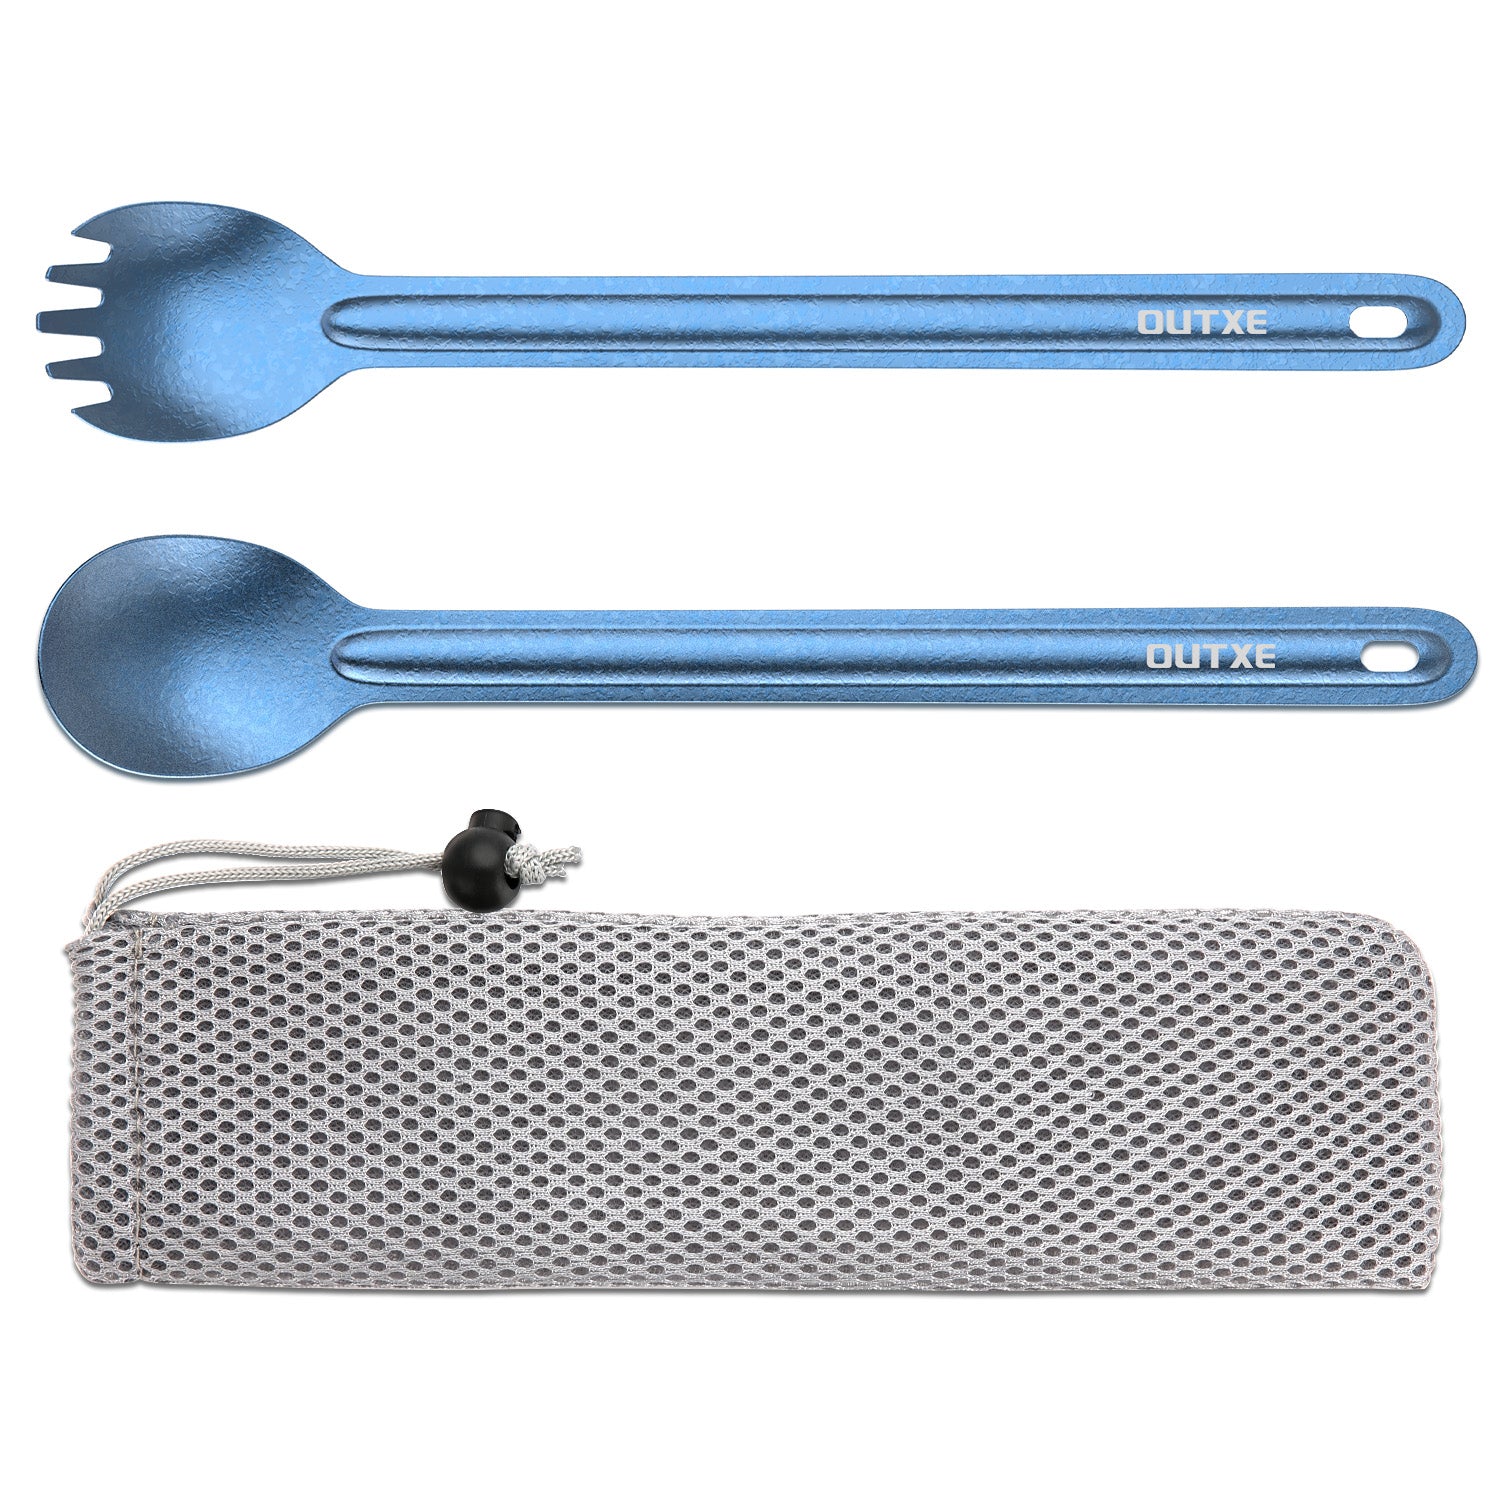 Ensō Essential Titanium Cutlery Is the Last Set You'll Ever Need